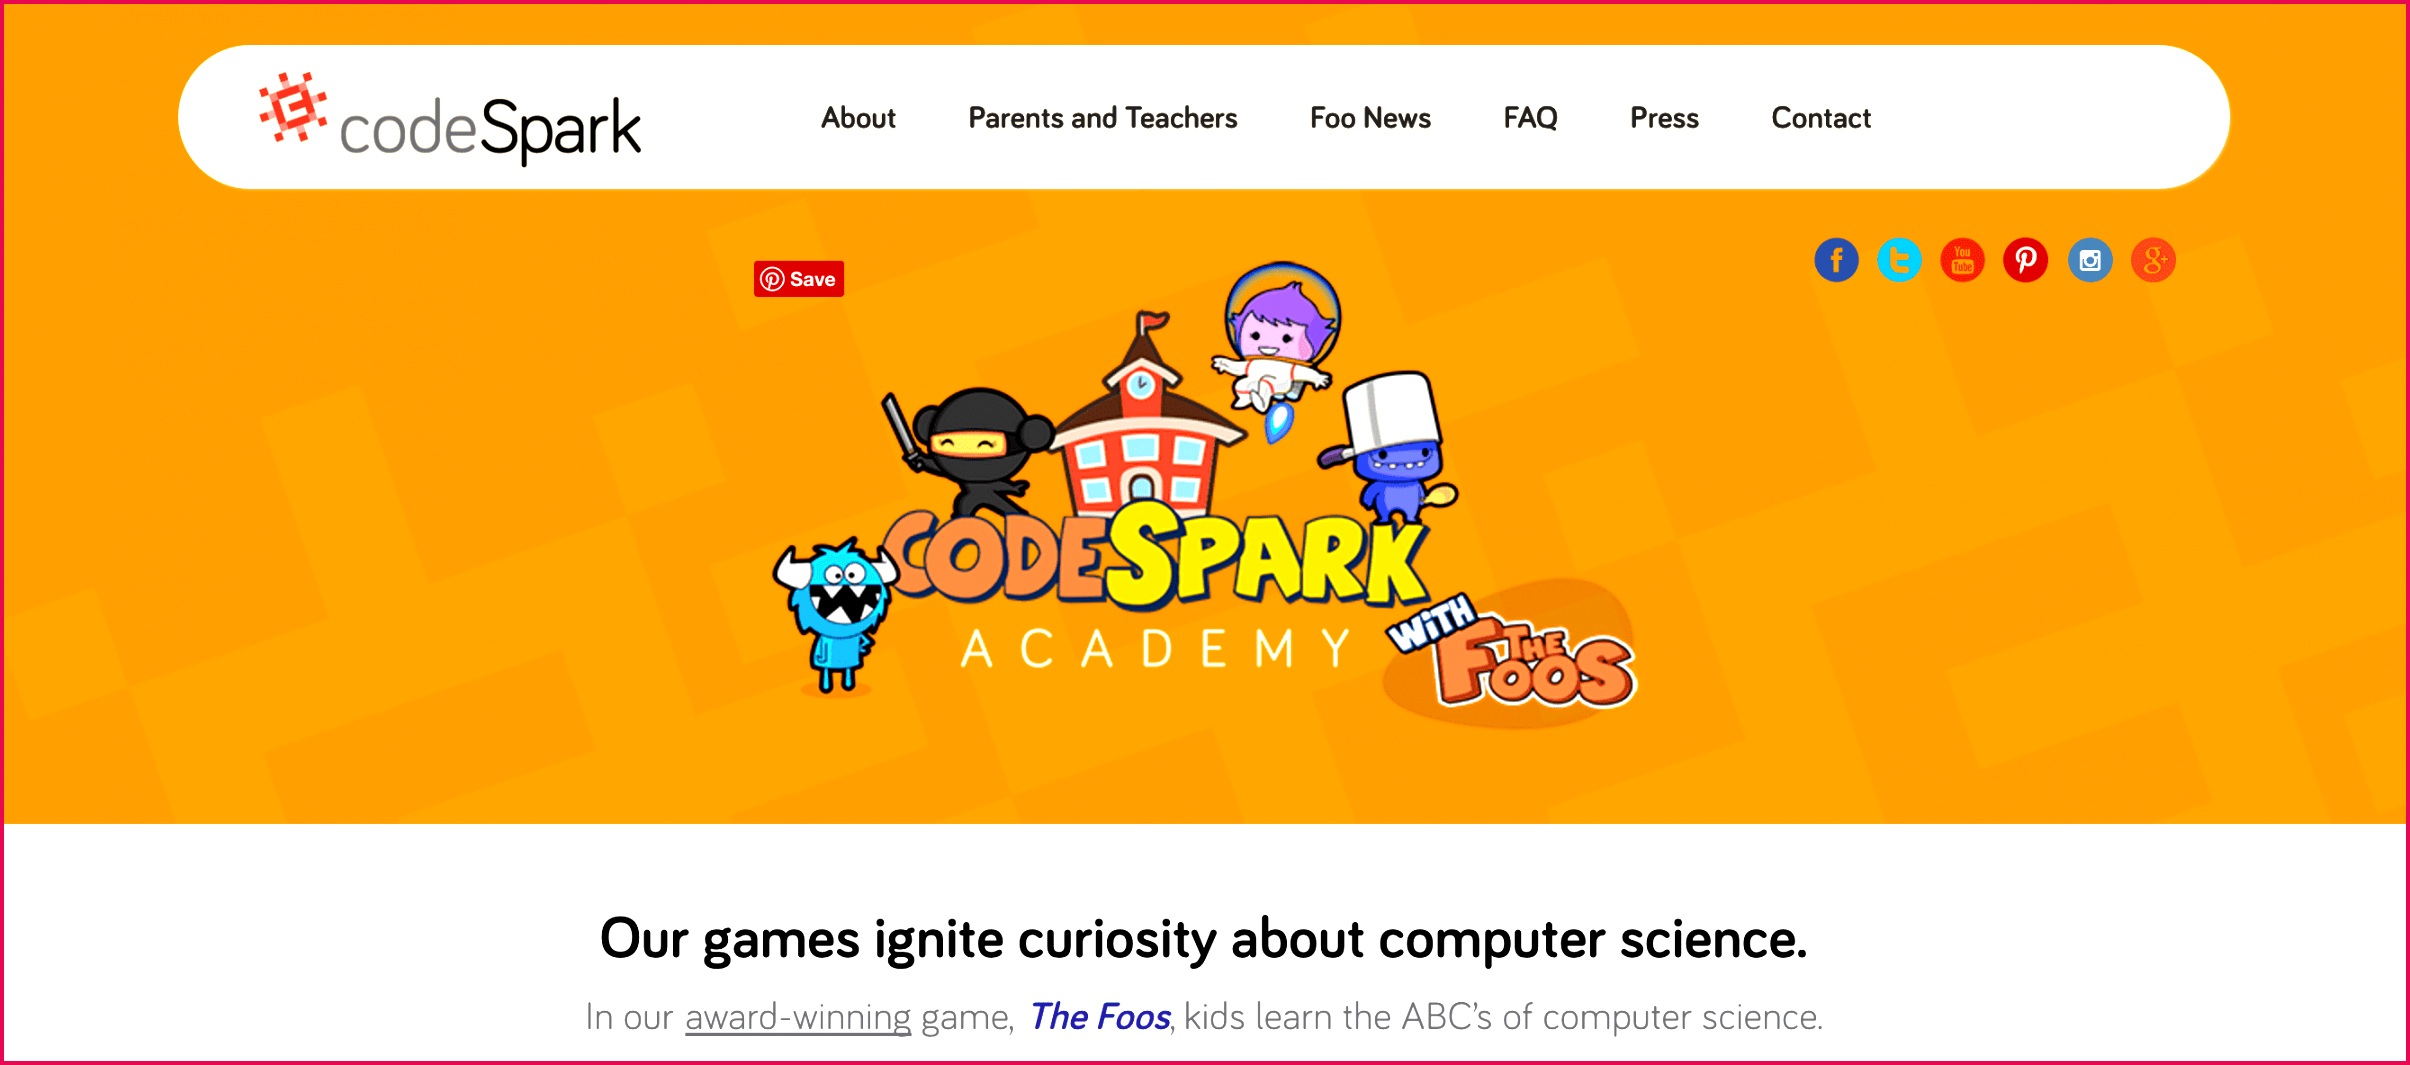 Designed to inspire younger students to engage in coding codeSpark introduces students to puter science through a fun interface